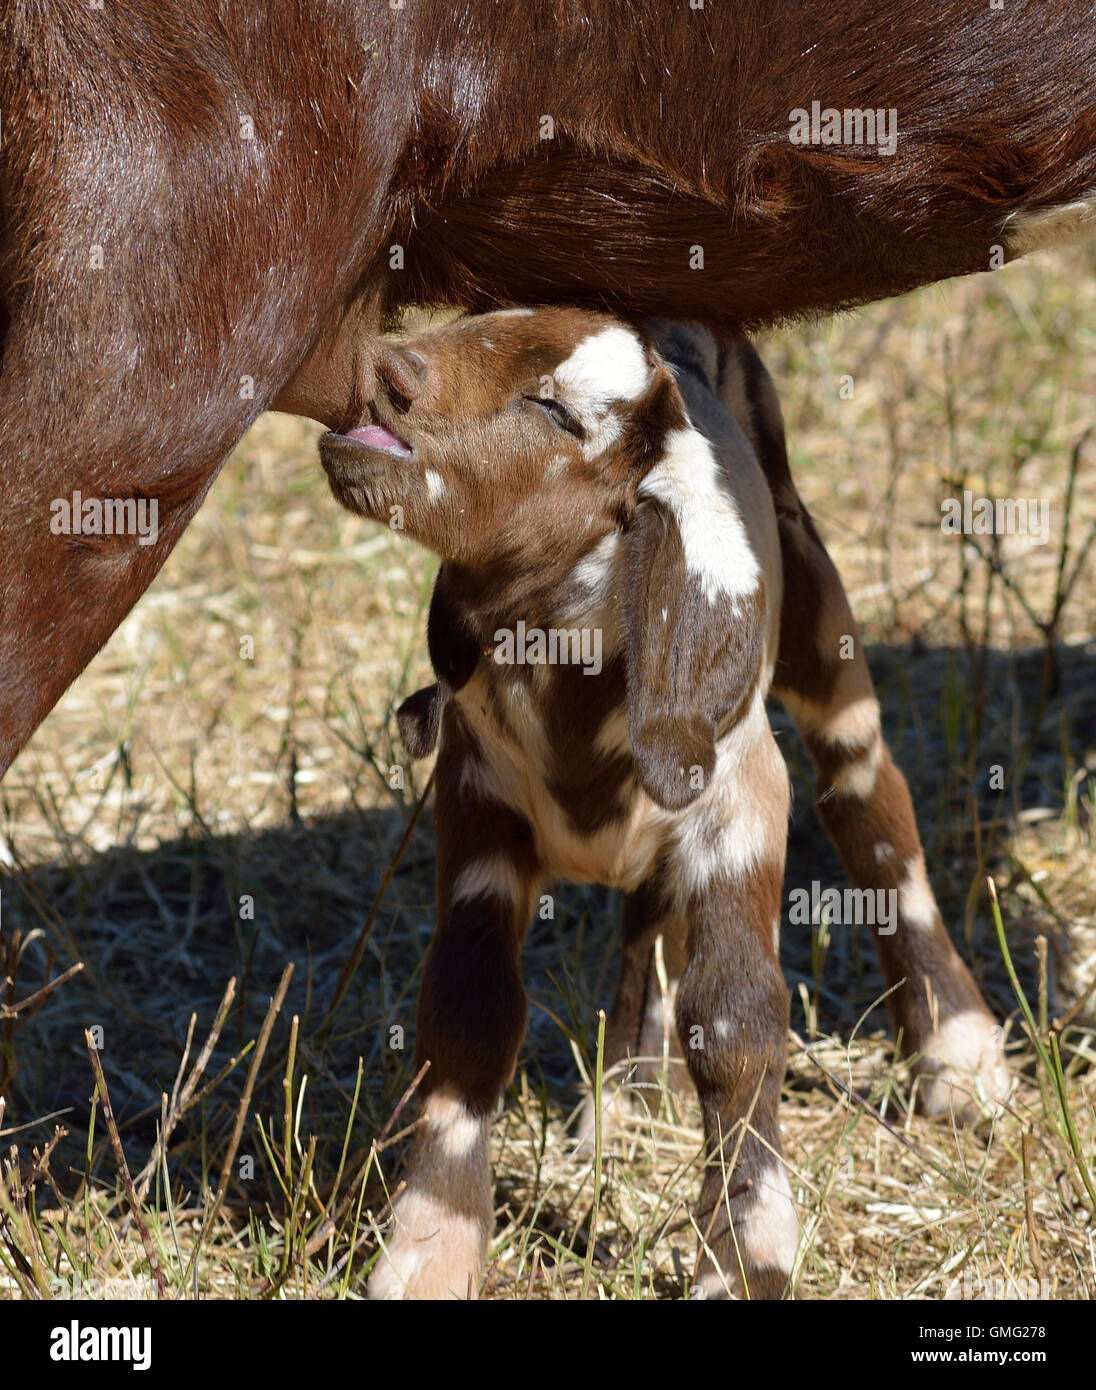 Kid suckling on mother goat Stock Photo